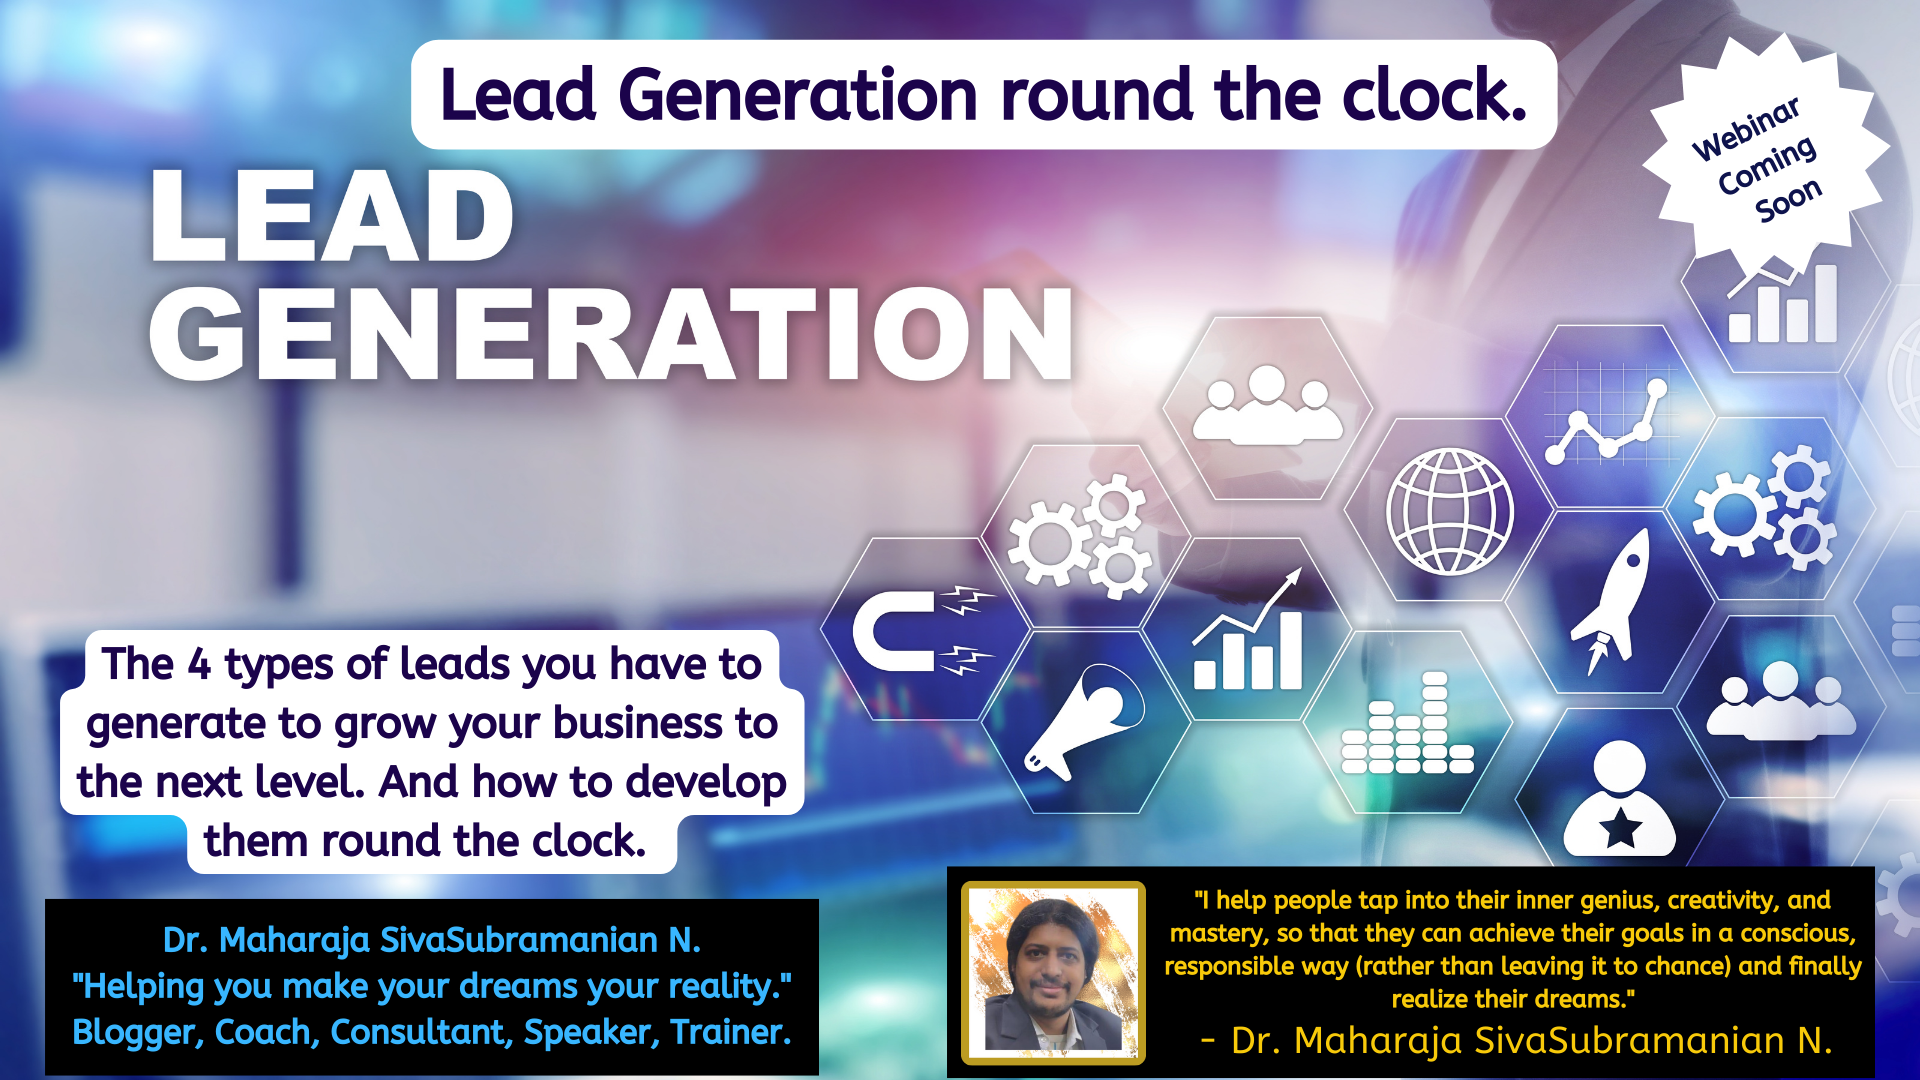 Lead Generation round the clock for Wedding Planners. – Upcoming free webinar.